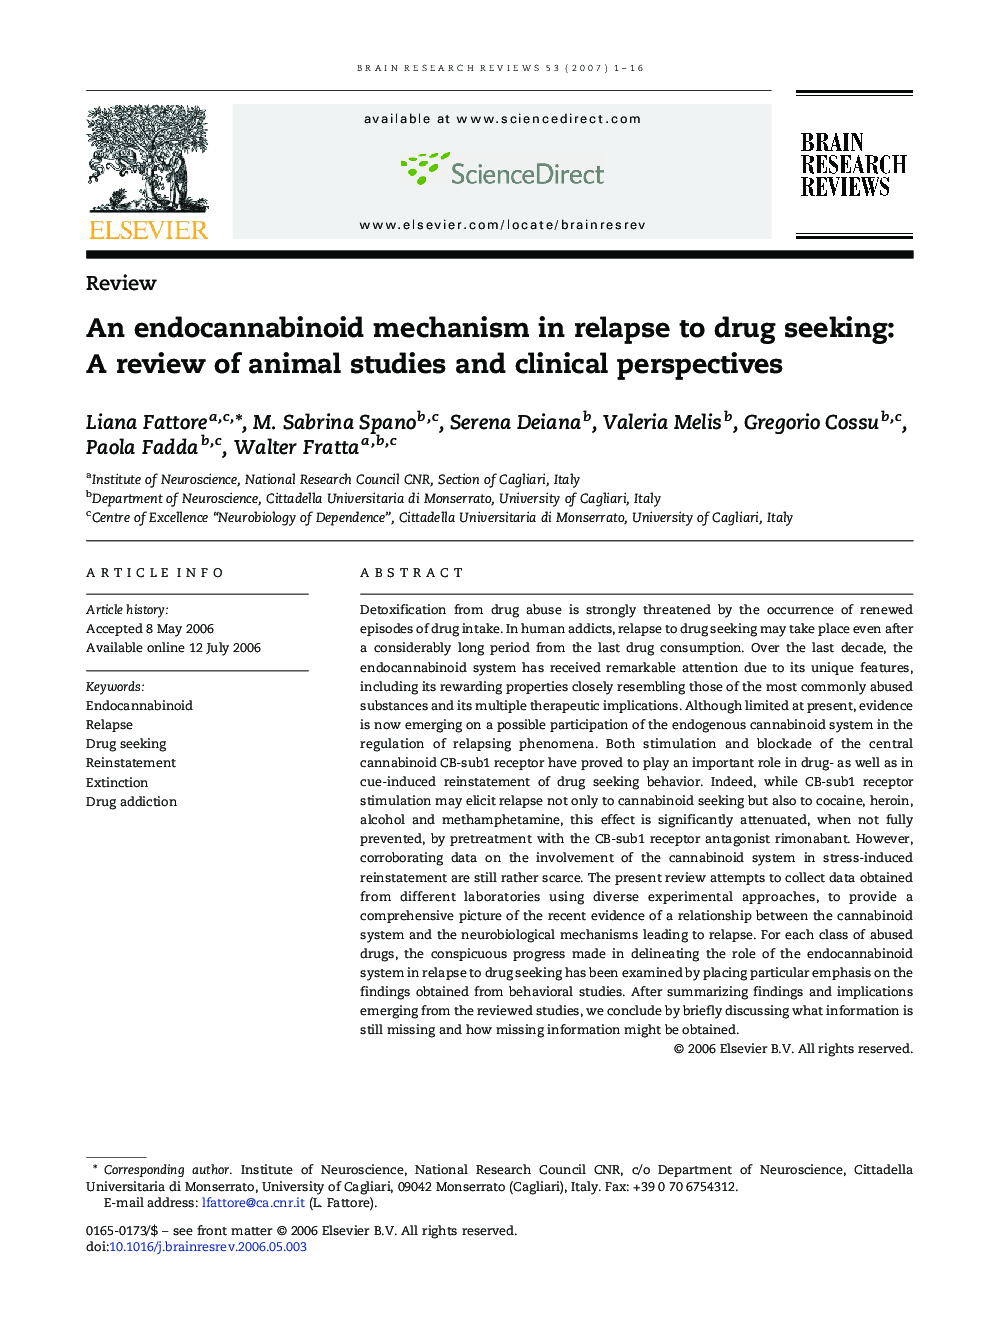 An endocannabinoid mechanism in relapse to drug seeking: A review of animal studies and clinical perspectives